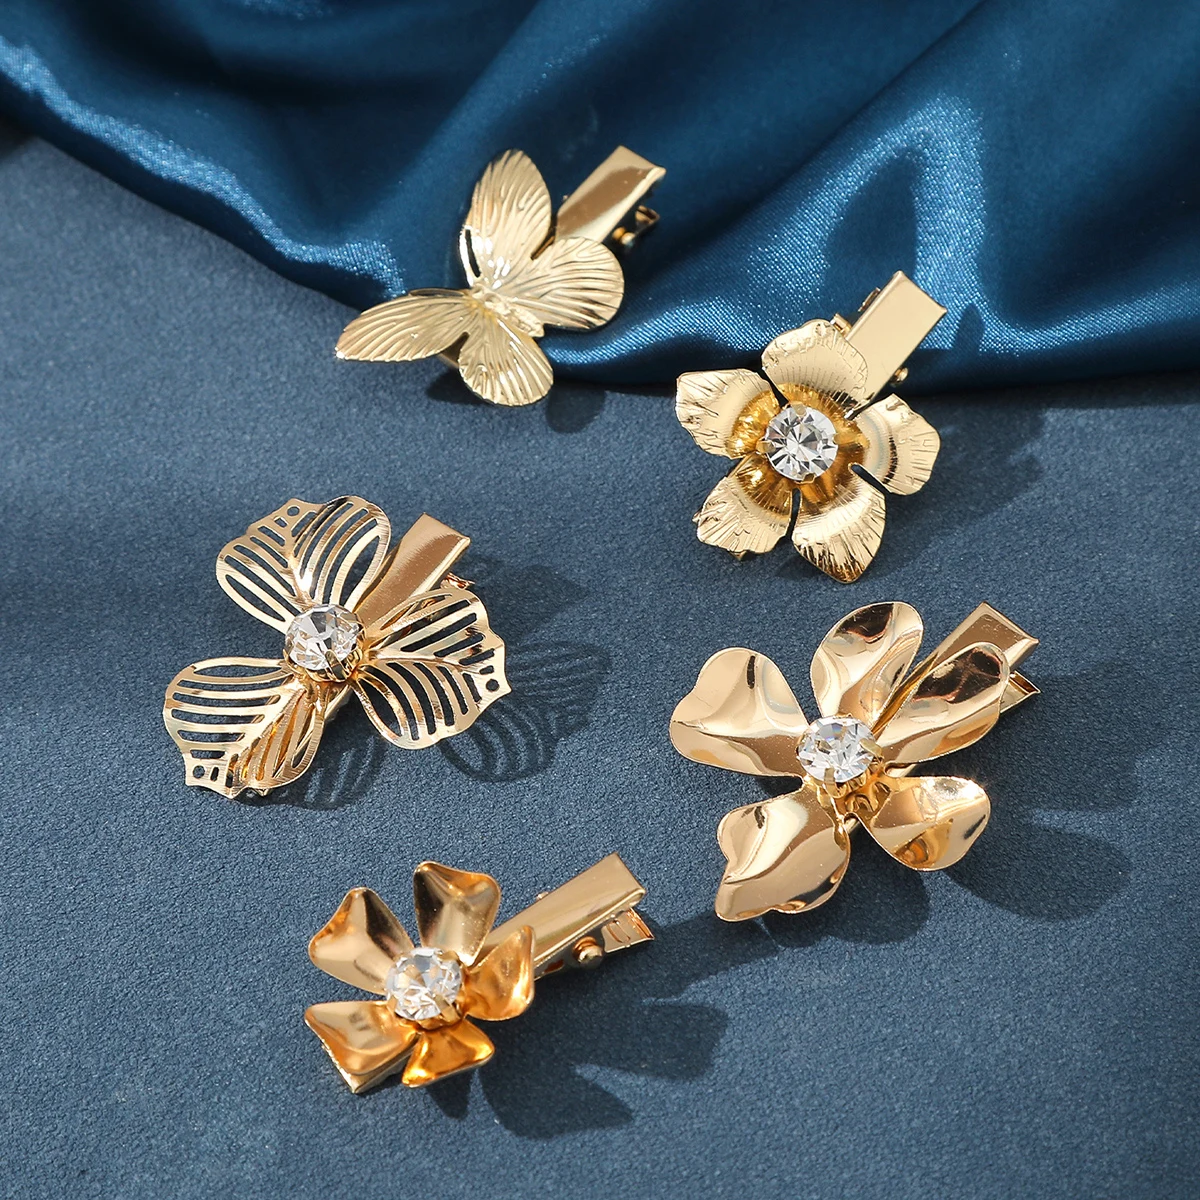 4PCS Alloy Gold Flower Hair Clips Metal Butterfly Barrettes Girl Duck Clip Hairpin Rhinestones Female Hair Snap Clips